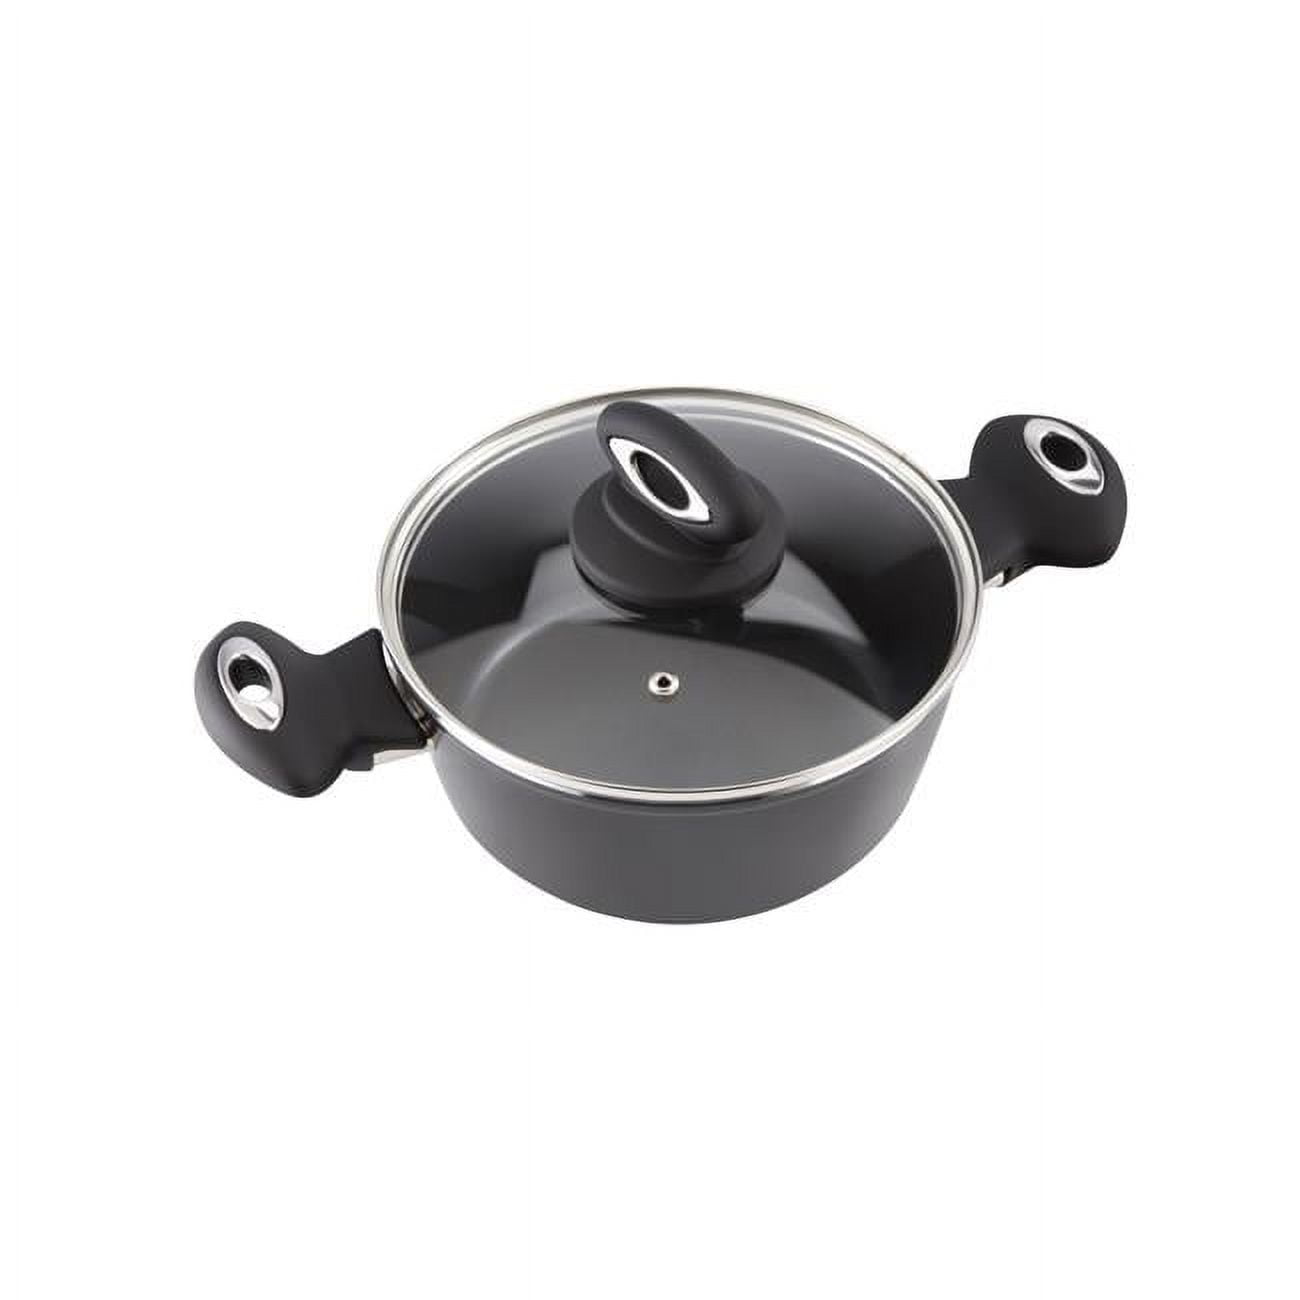 LIFERUN Dutch Oven Pot with Lid, 9.7 Quart Cast Iron Dutch Oven, with Lid Lifter Handle & Stand and Dual Function Lid Griddle for Home Cooking BBQ